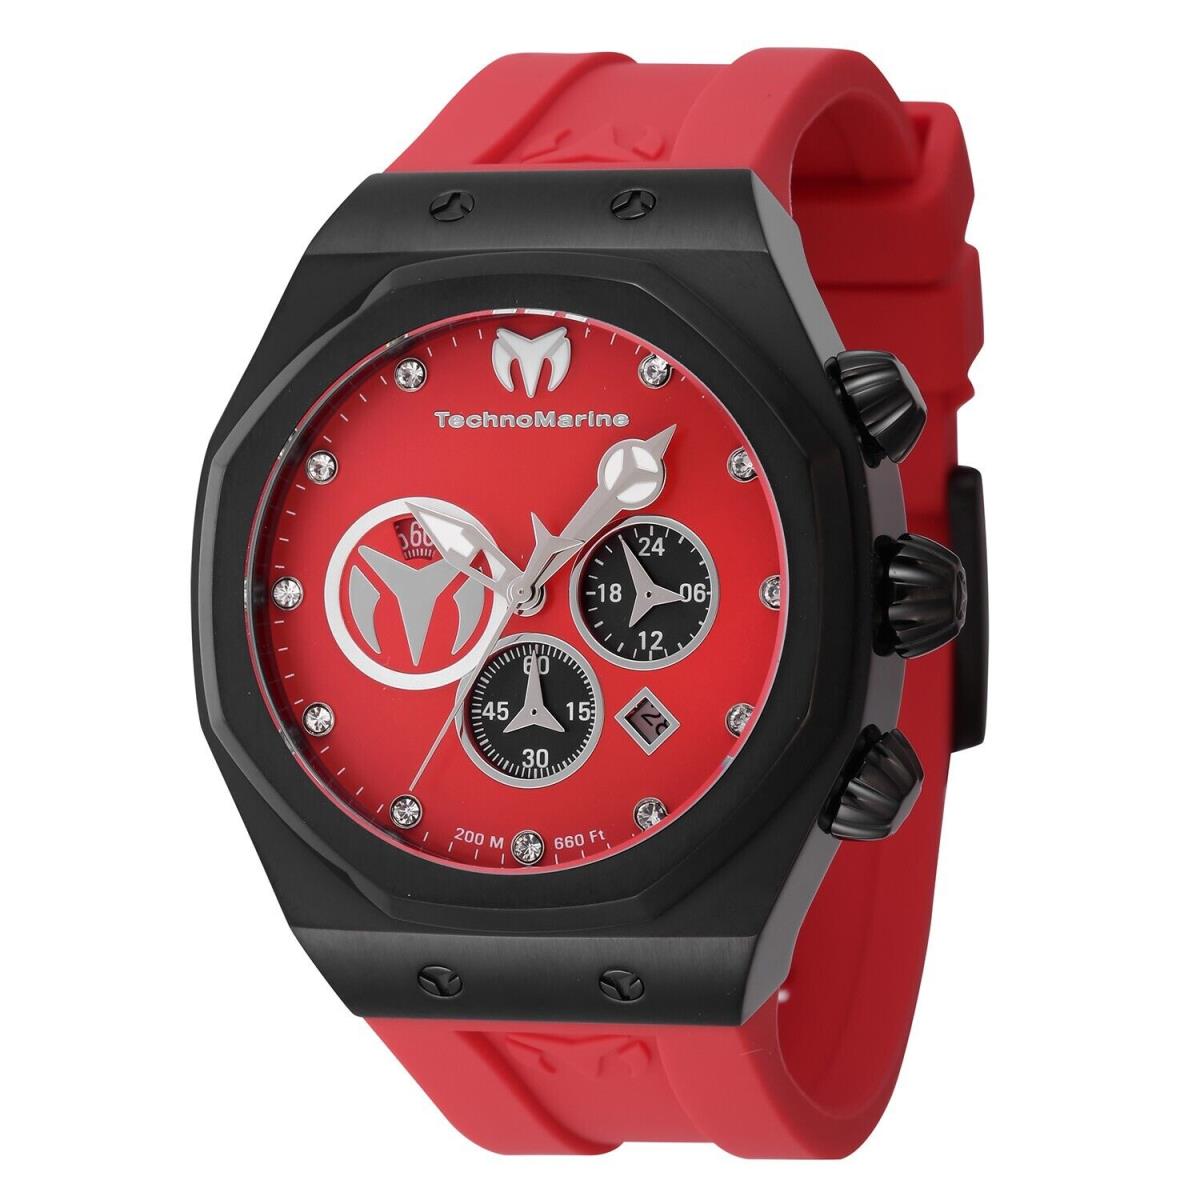 Technomarine TM-523003 Cruise Sun Reef Red 45MM Watch with Dial Markers - Dial: Red, Band: Red, Bezel: Black